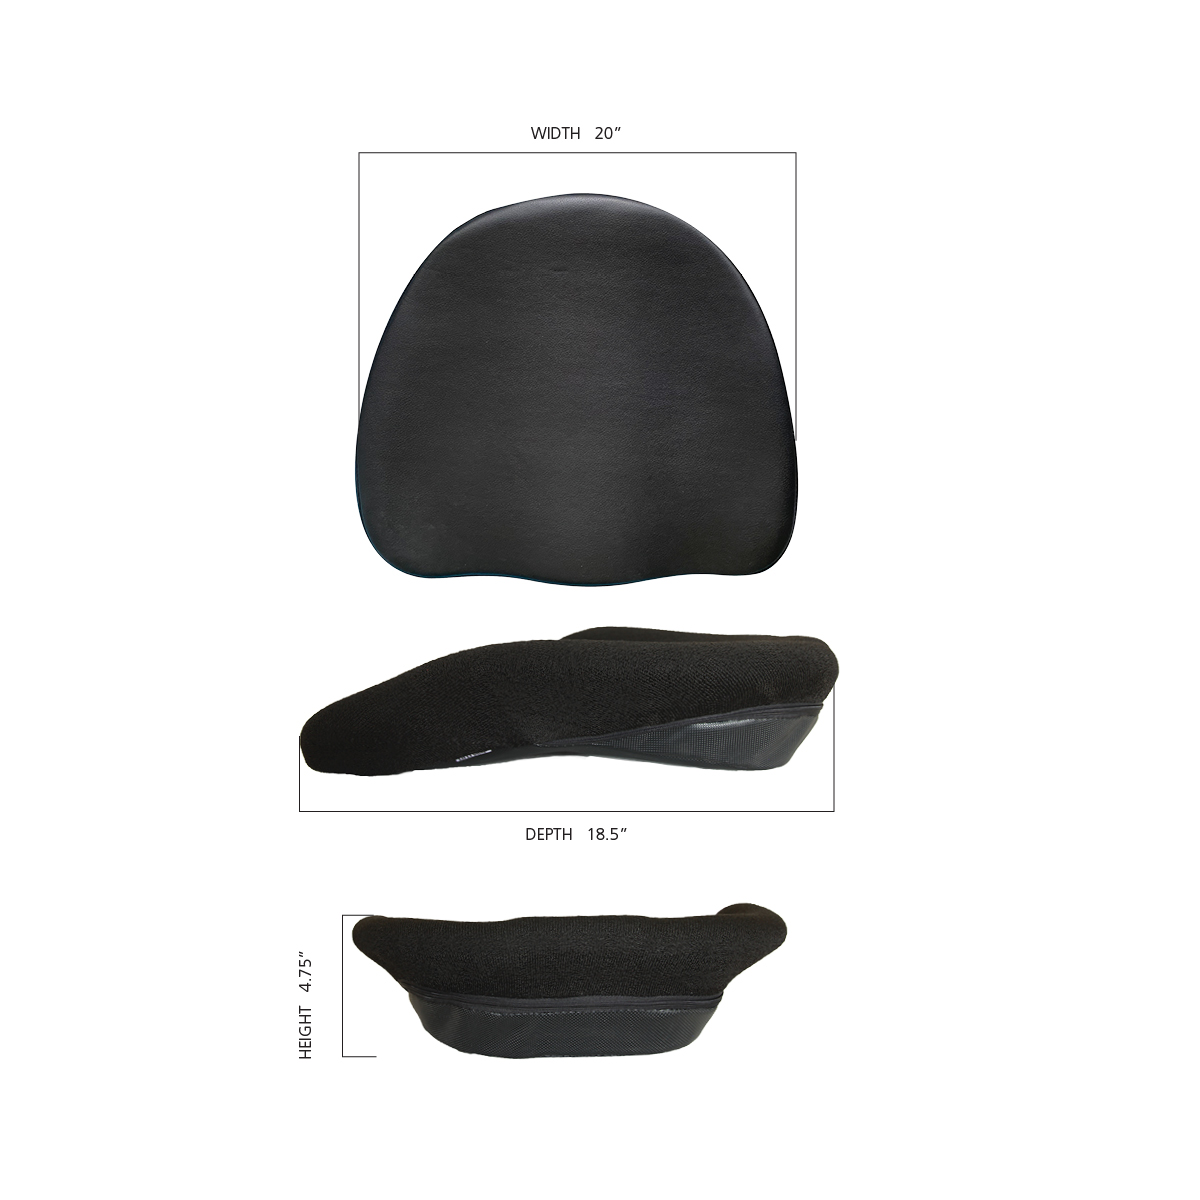 Size Guide for LIFEFORM Wedge Cusion Seat